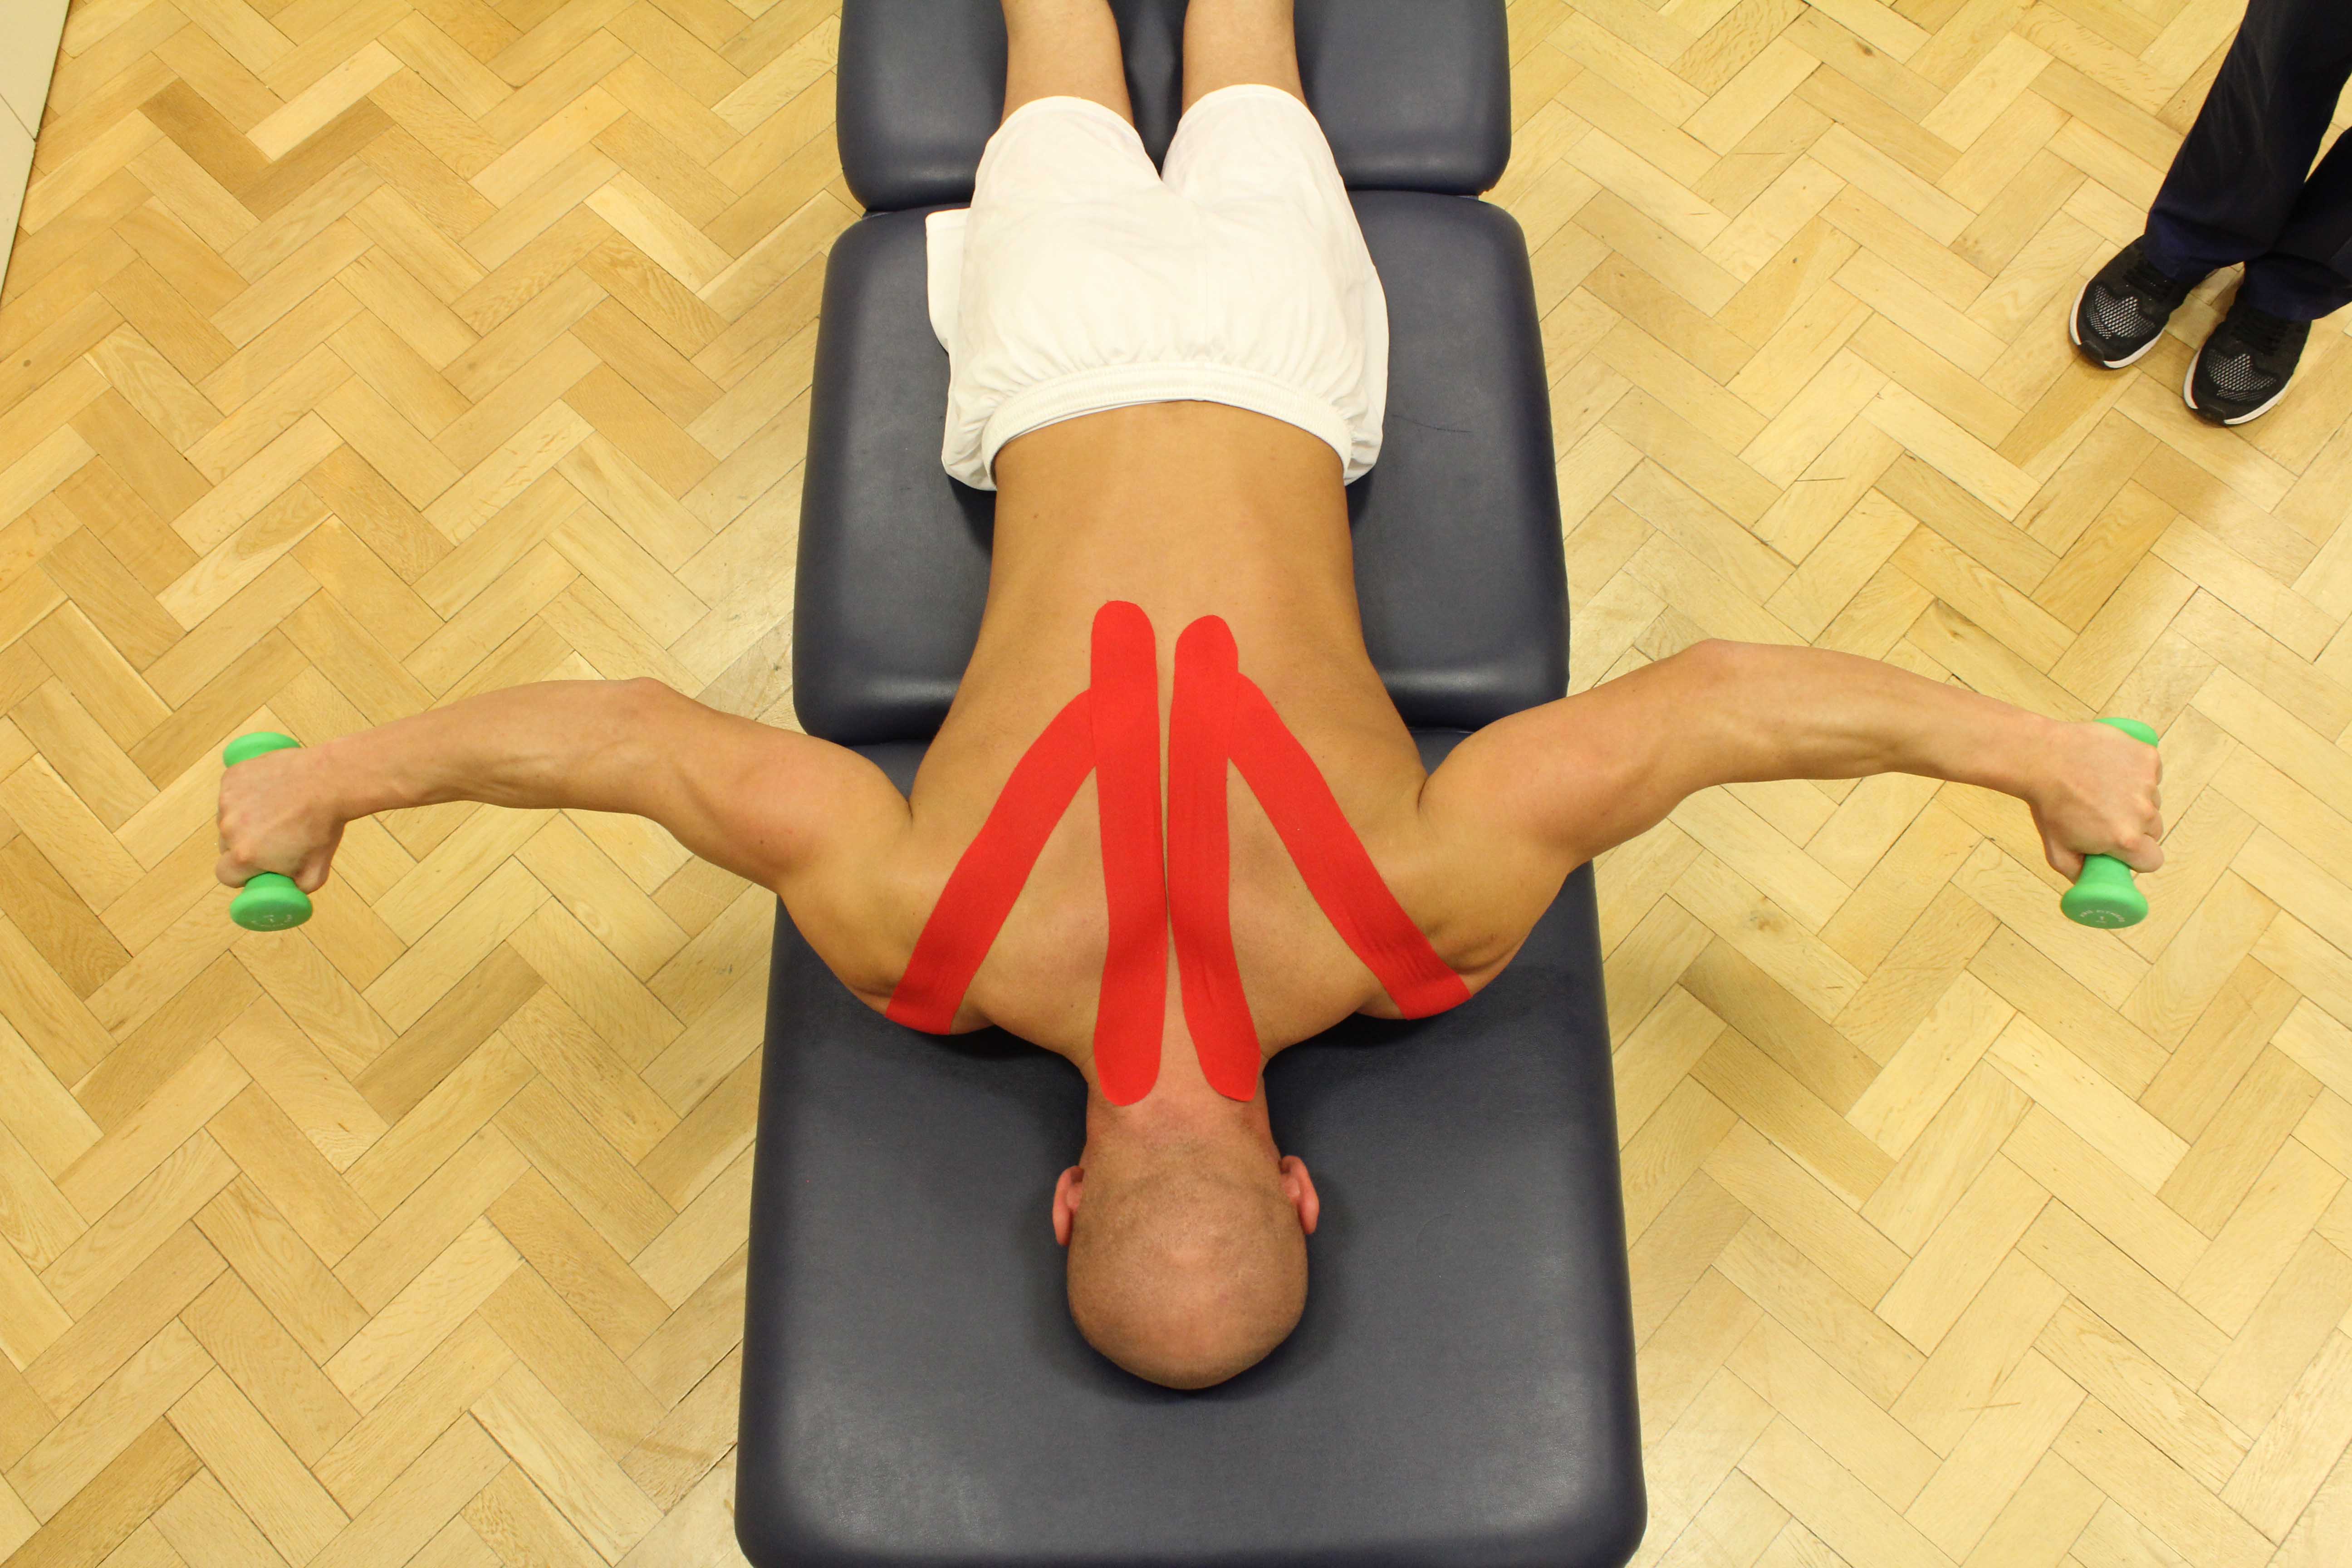 Percussion massage applied to the mid thoracic spine